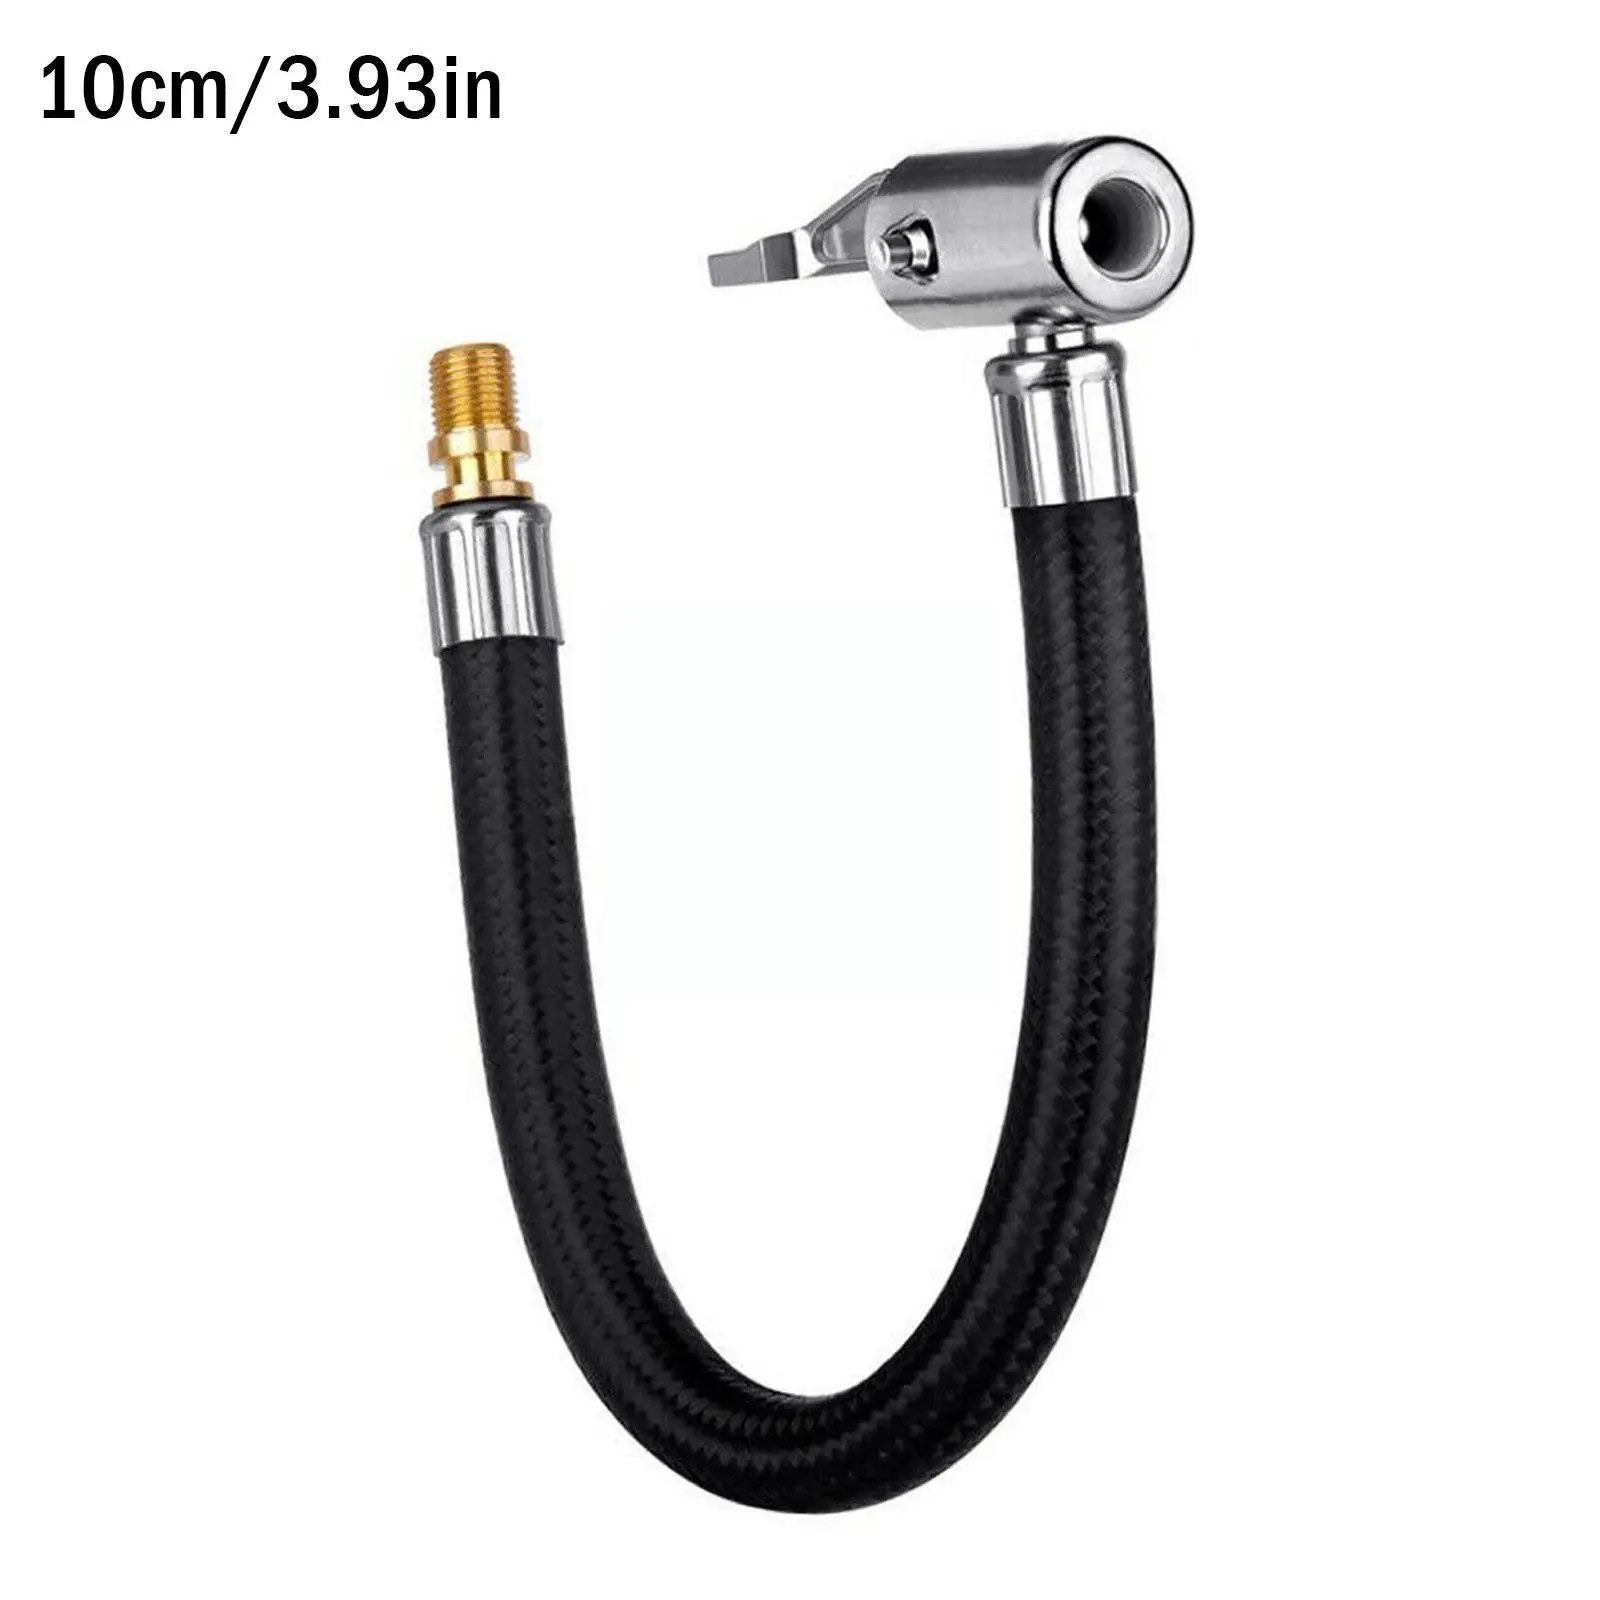 

Car Tire Air Inflator Hose Inflatable Pump Extension Adapter Chuck Motorcycle Twist Air Bike 10cm Locking Tube Tyre Connect N3h8